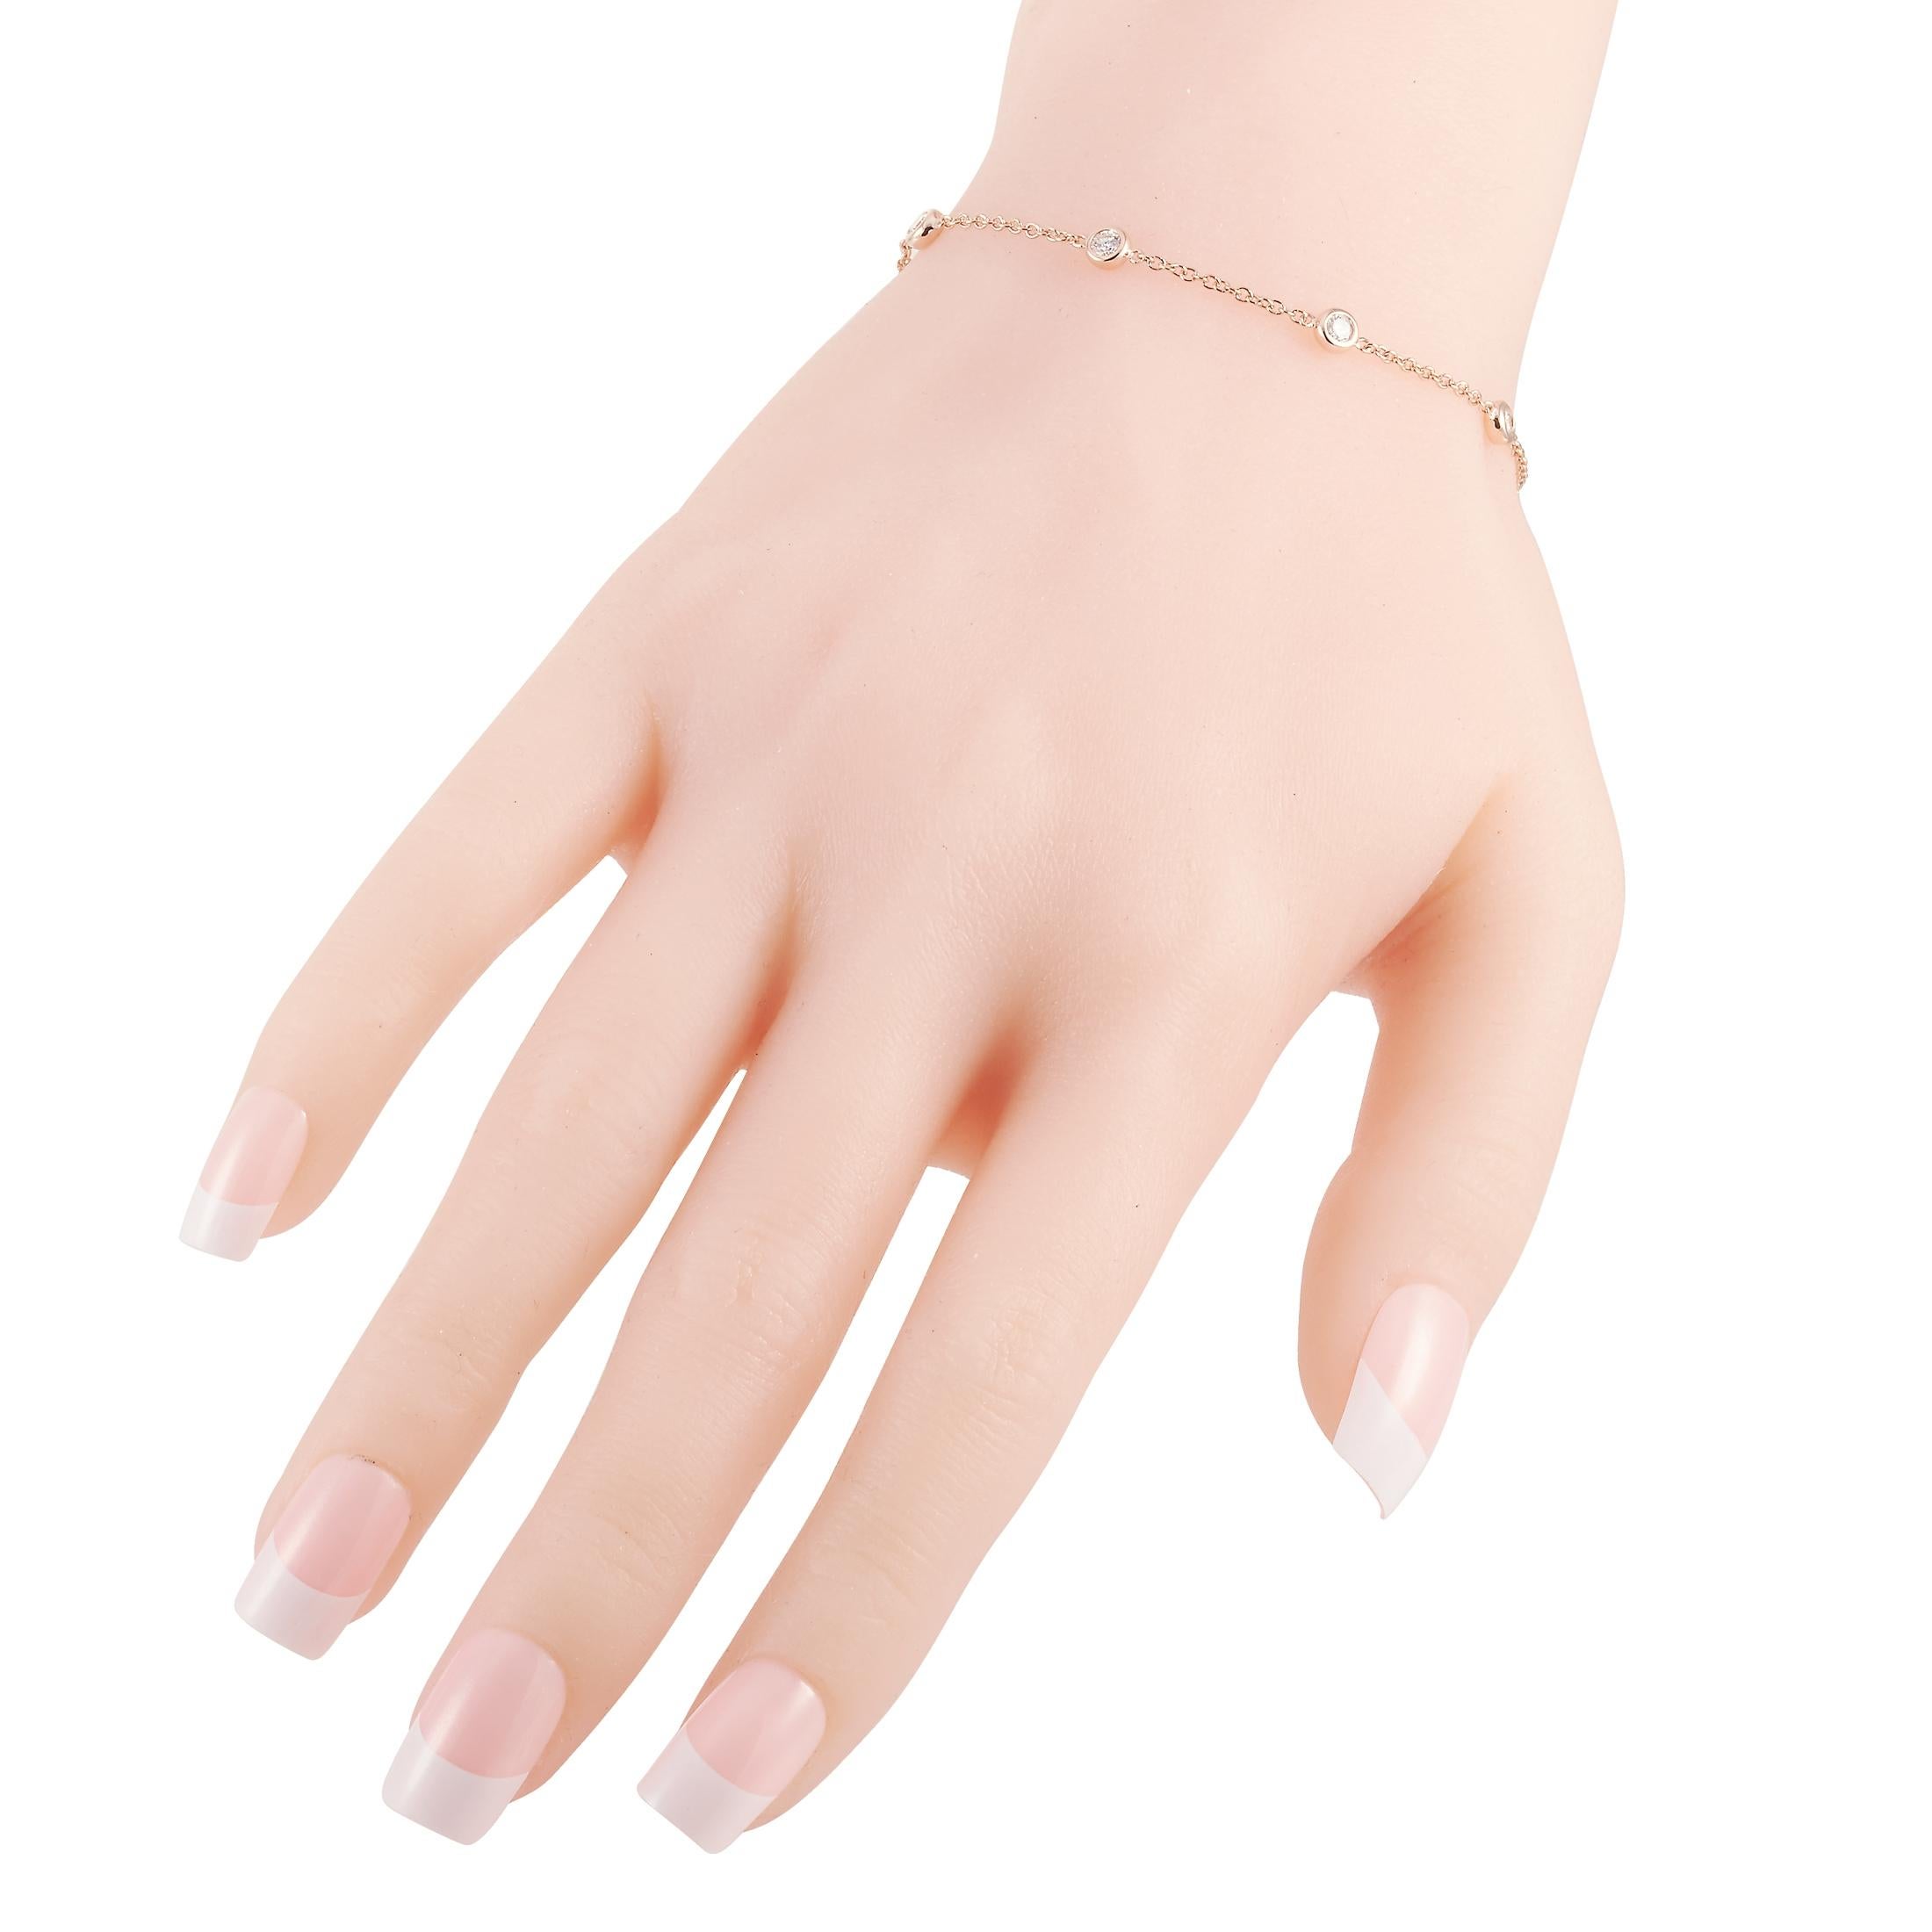 This LB Exclusive bracelet is made of 14K rose gold and embellished with diamonds that amount to 0.50 carats. The bracelet weighs 2.5 grams and measures 6.50” in length.
 
 Offered in brand new condition, this jewelry piece includes a gift box.